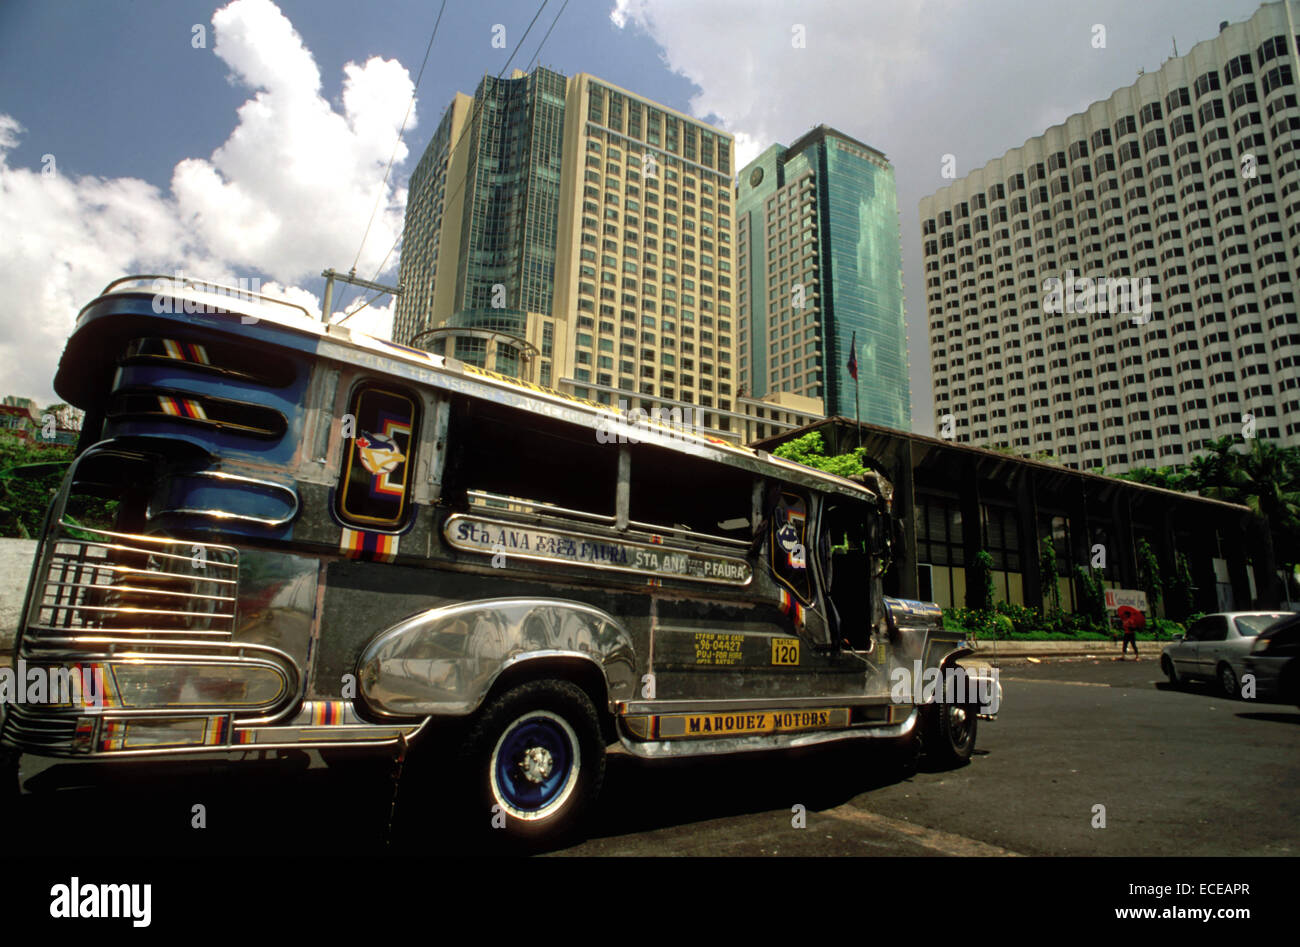 Transportation: jeepneys on the streets of Malate. Manila. Philippines. Jeepneys are the most popular means of public transporta Stock Photo